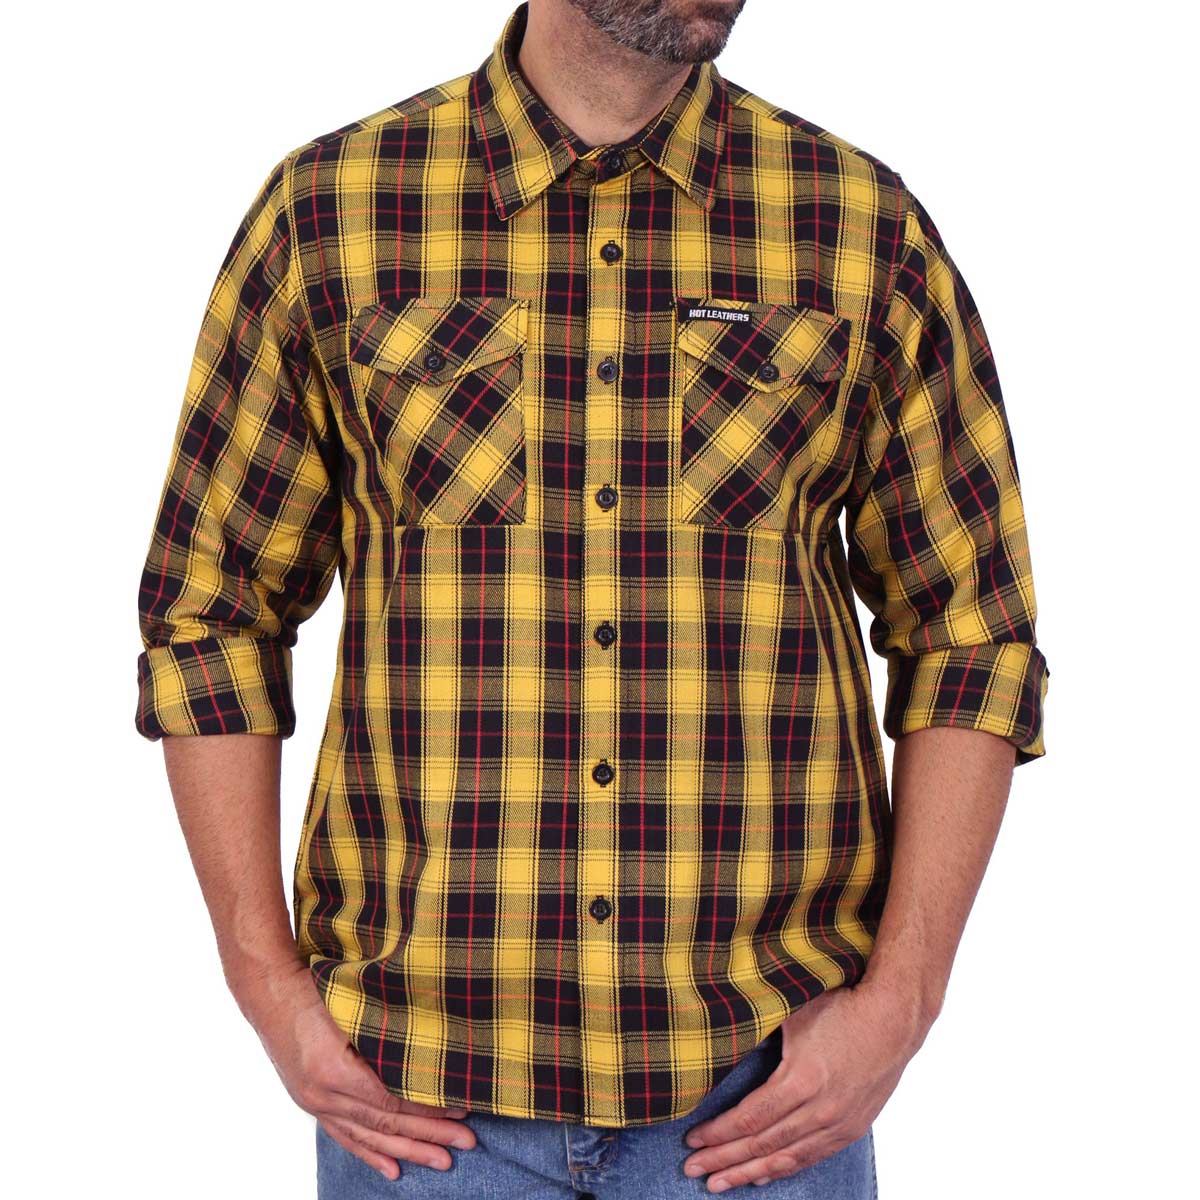 Hot Leathers FLM2036 Men's Yellow Red and Black Long Sleeve Flannel Shirt